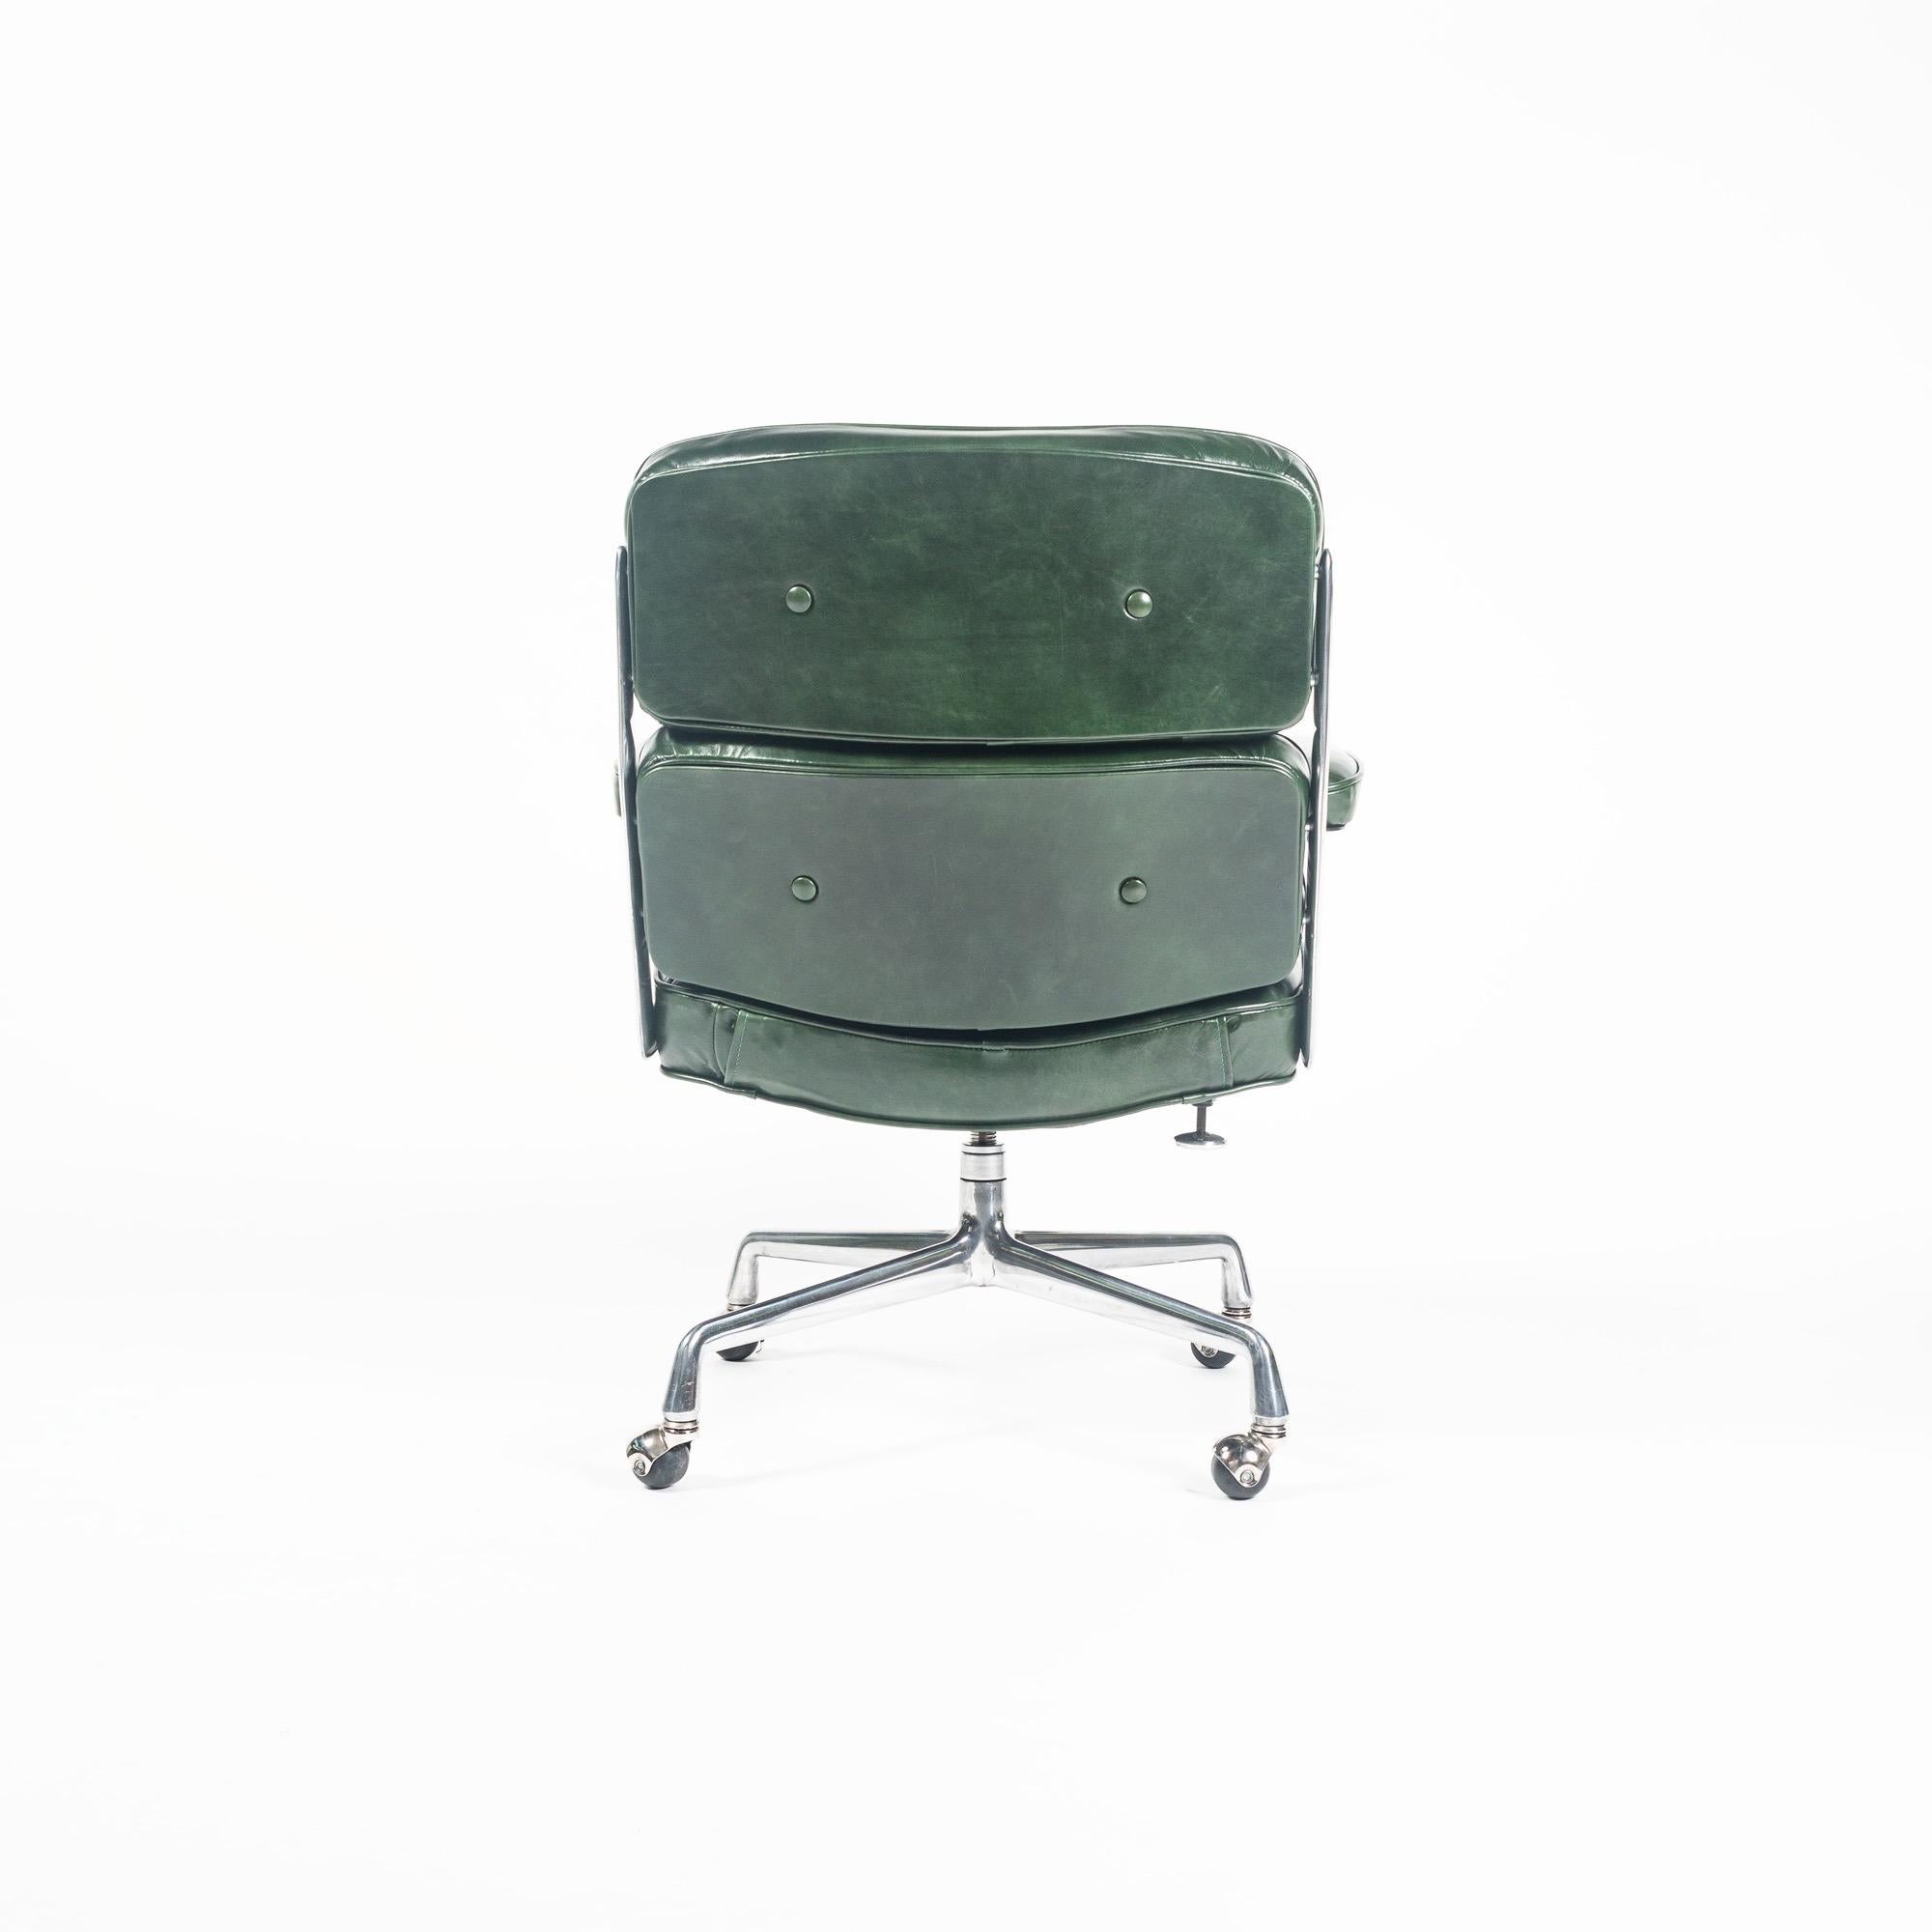 Mid-Century Modern First Gen Eames Time Life Lobby Chair in British Racing Green